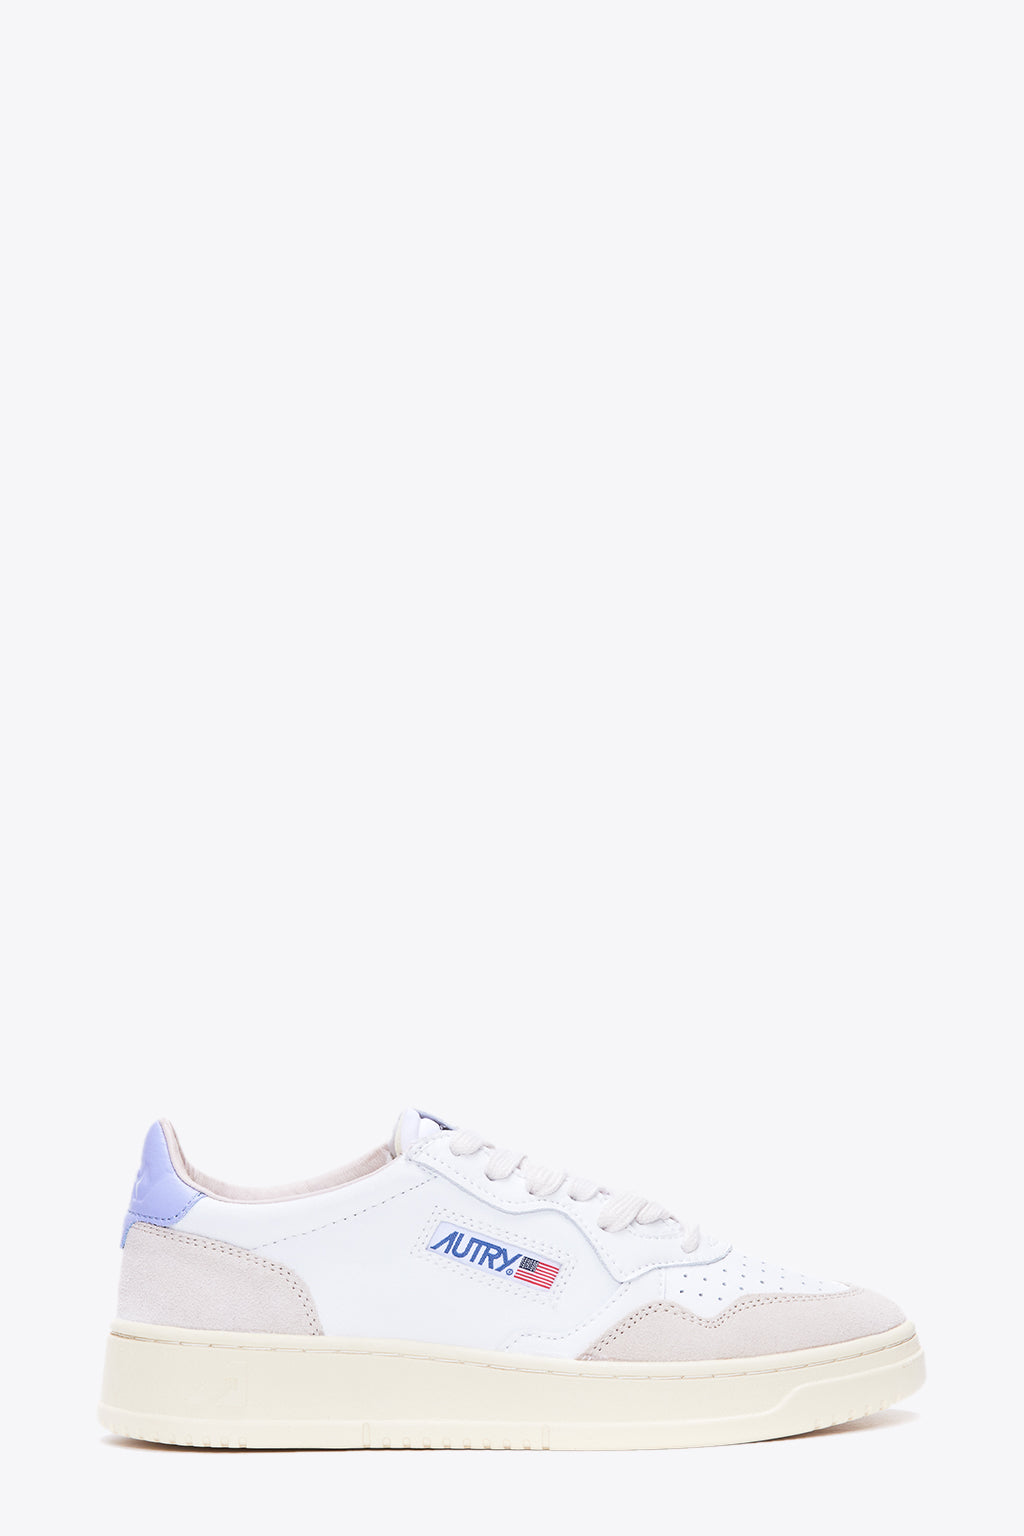 alt-image__White-leather-and-suede-low-sneaker-with-lavender-tab---Medalist